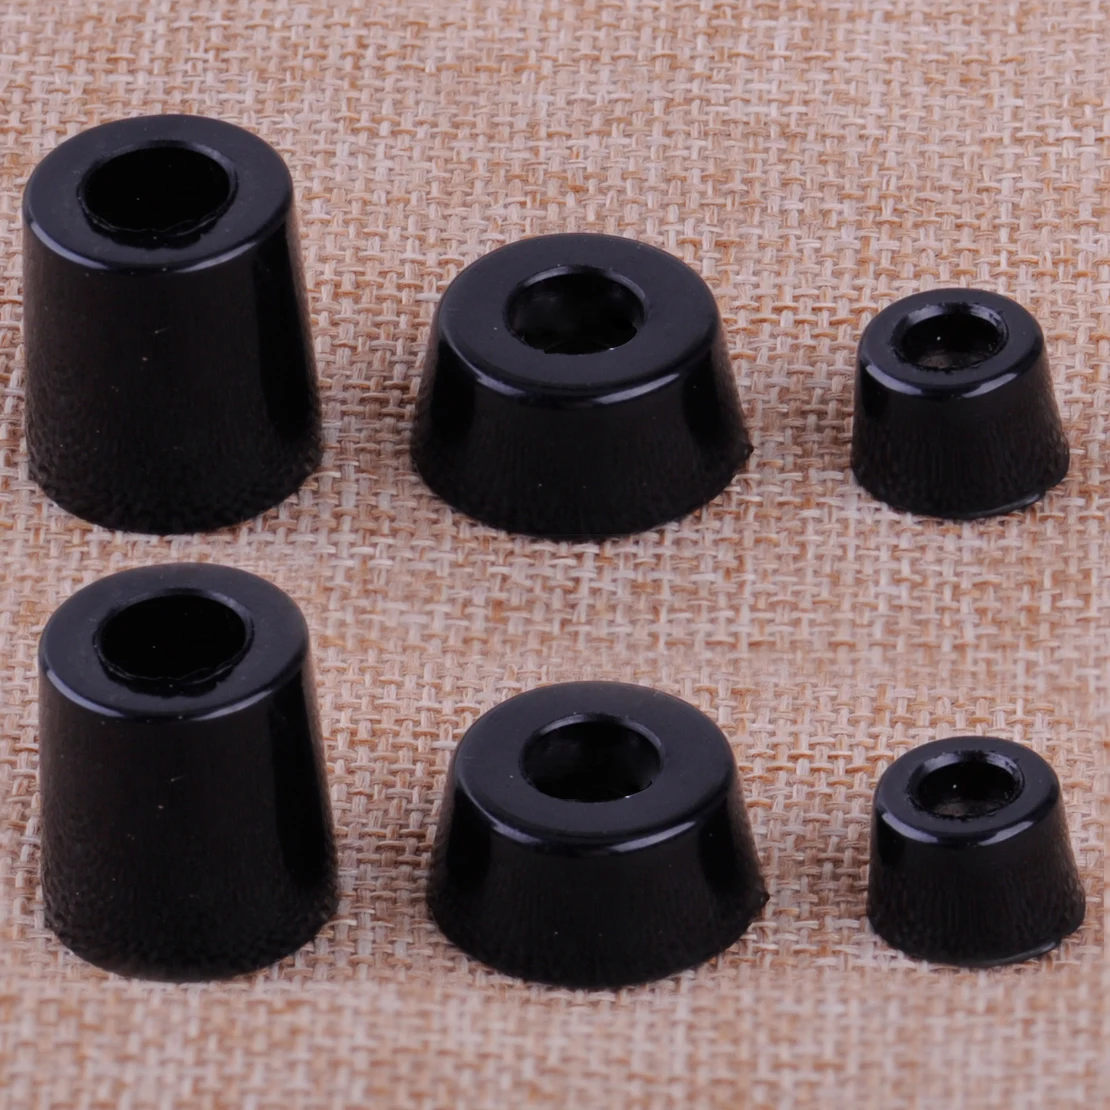 Details about   Rubber Leg 19x15x17mm Tips Shock Absorber Stand for Furniture Box Table Foot Pad